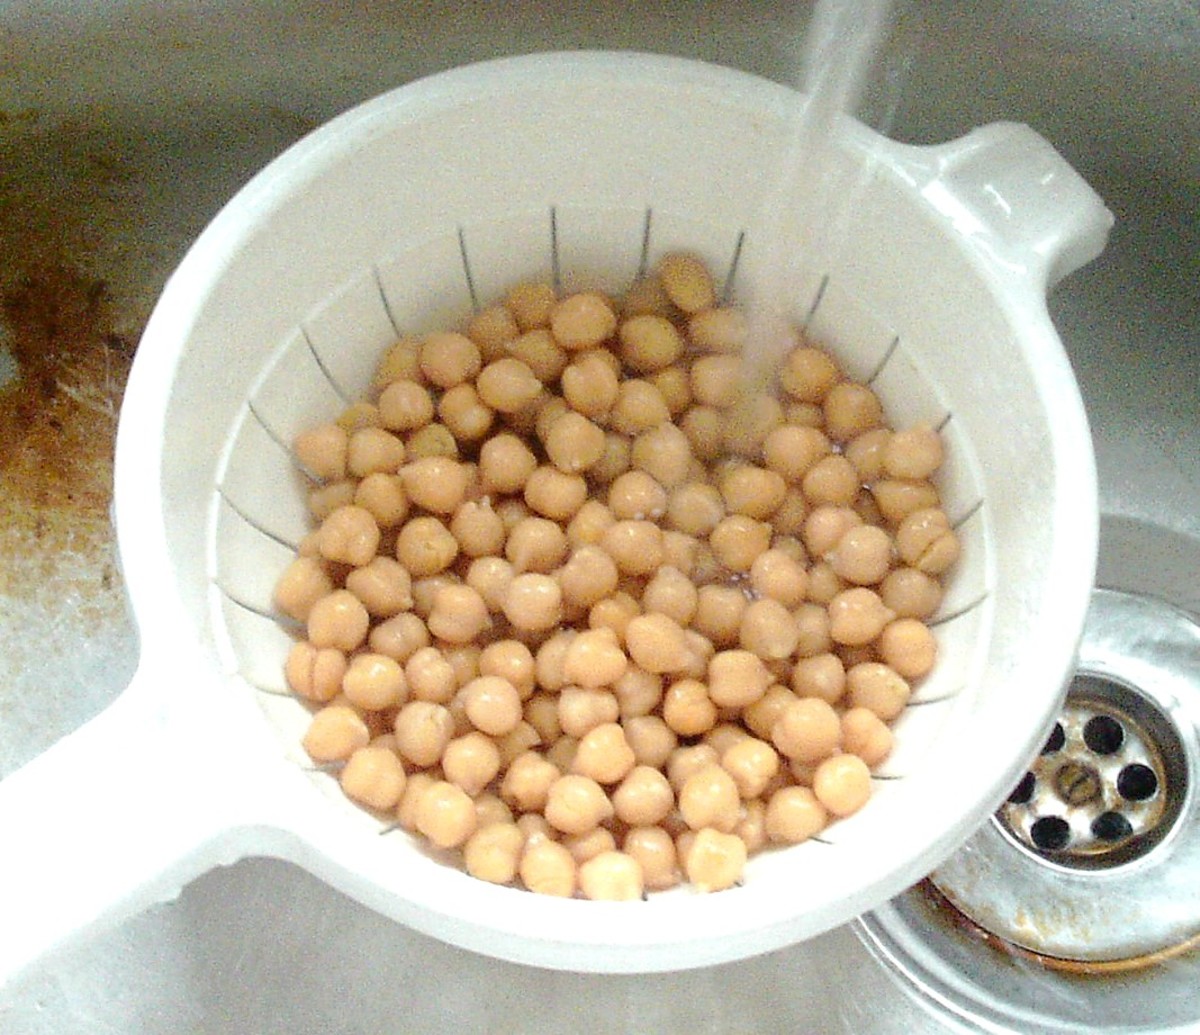 It's a good idea to wash canned chickpeas under running cold water before use.